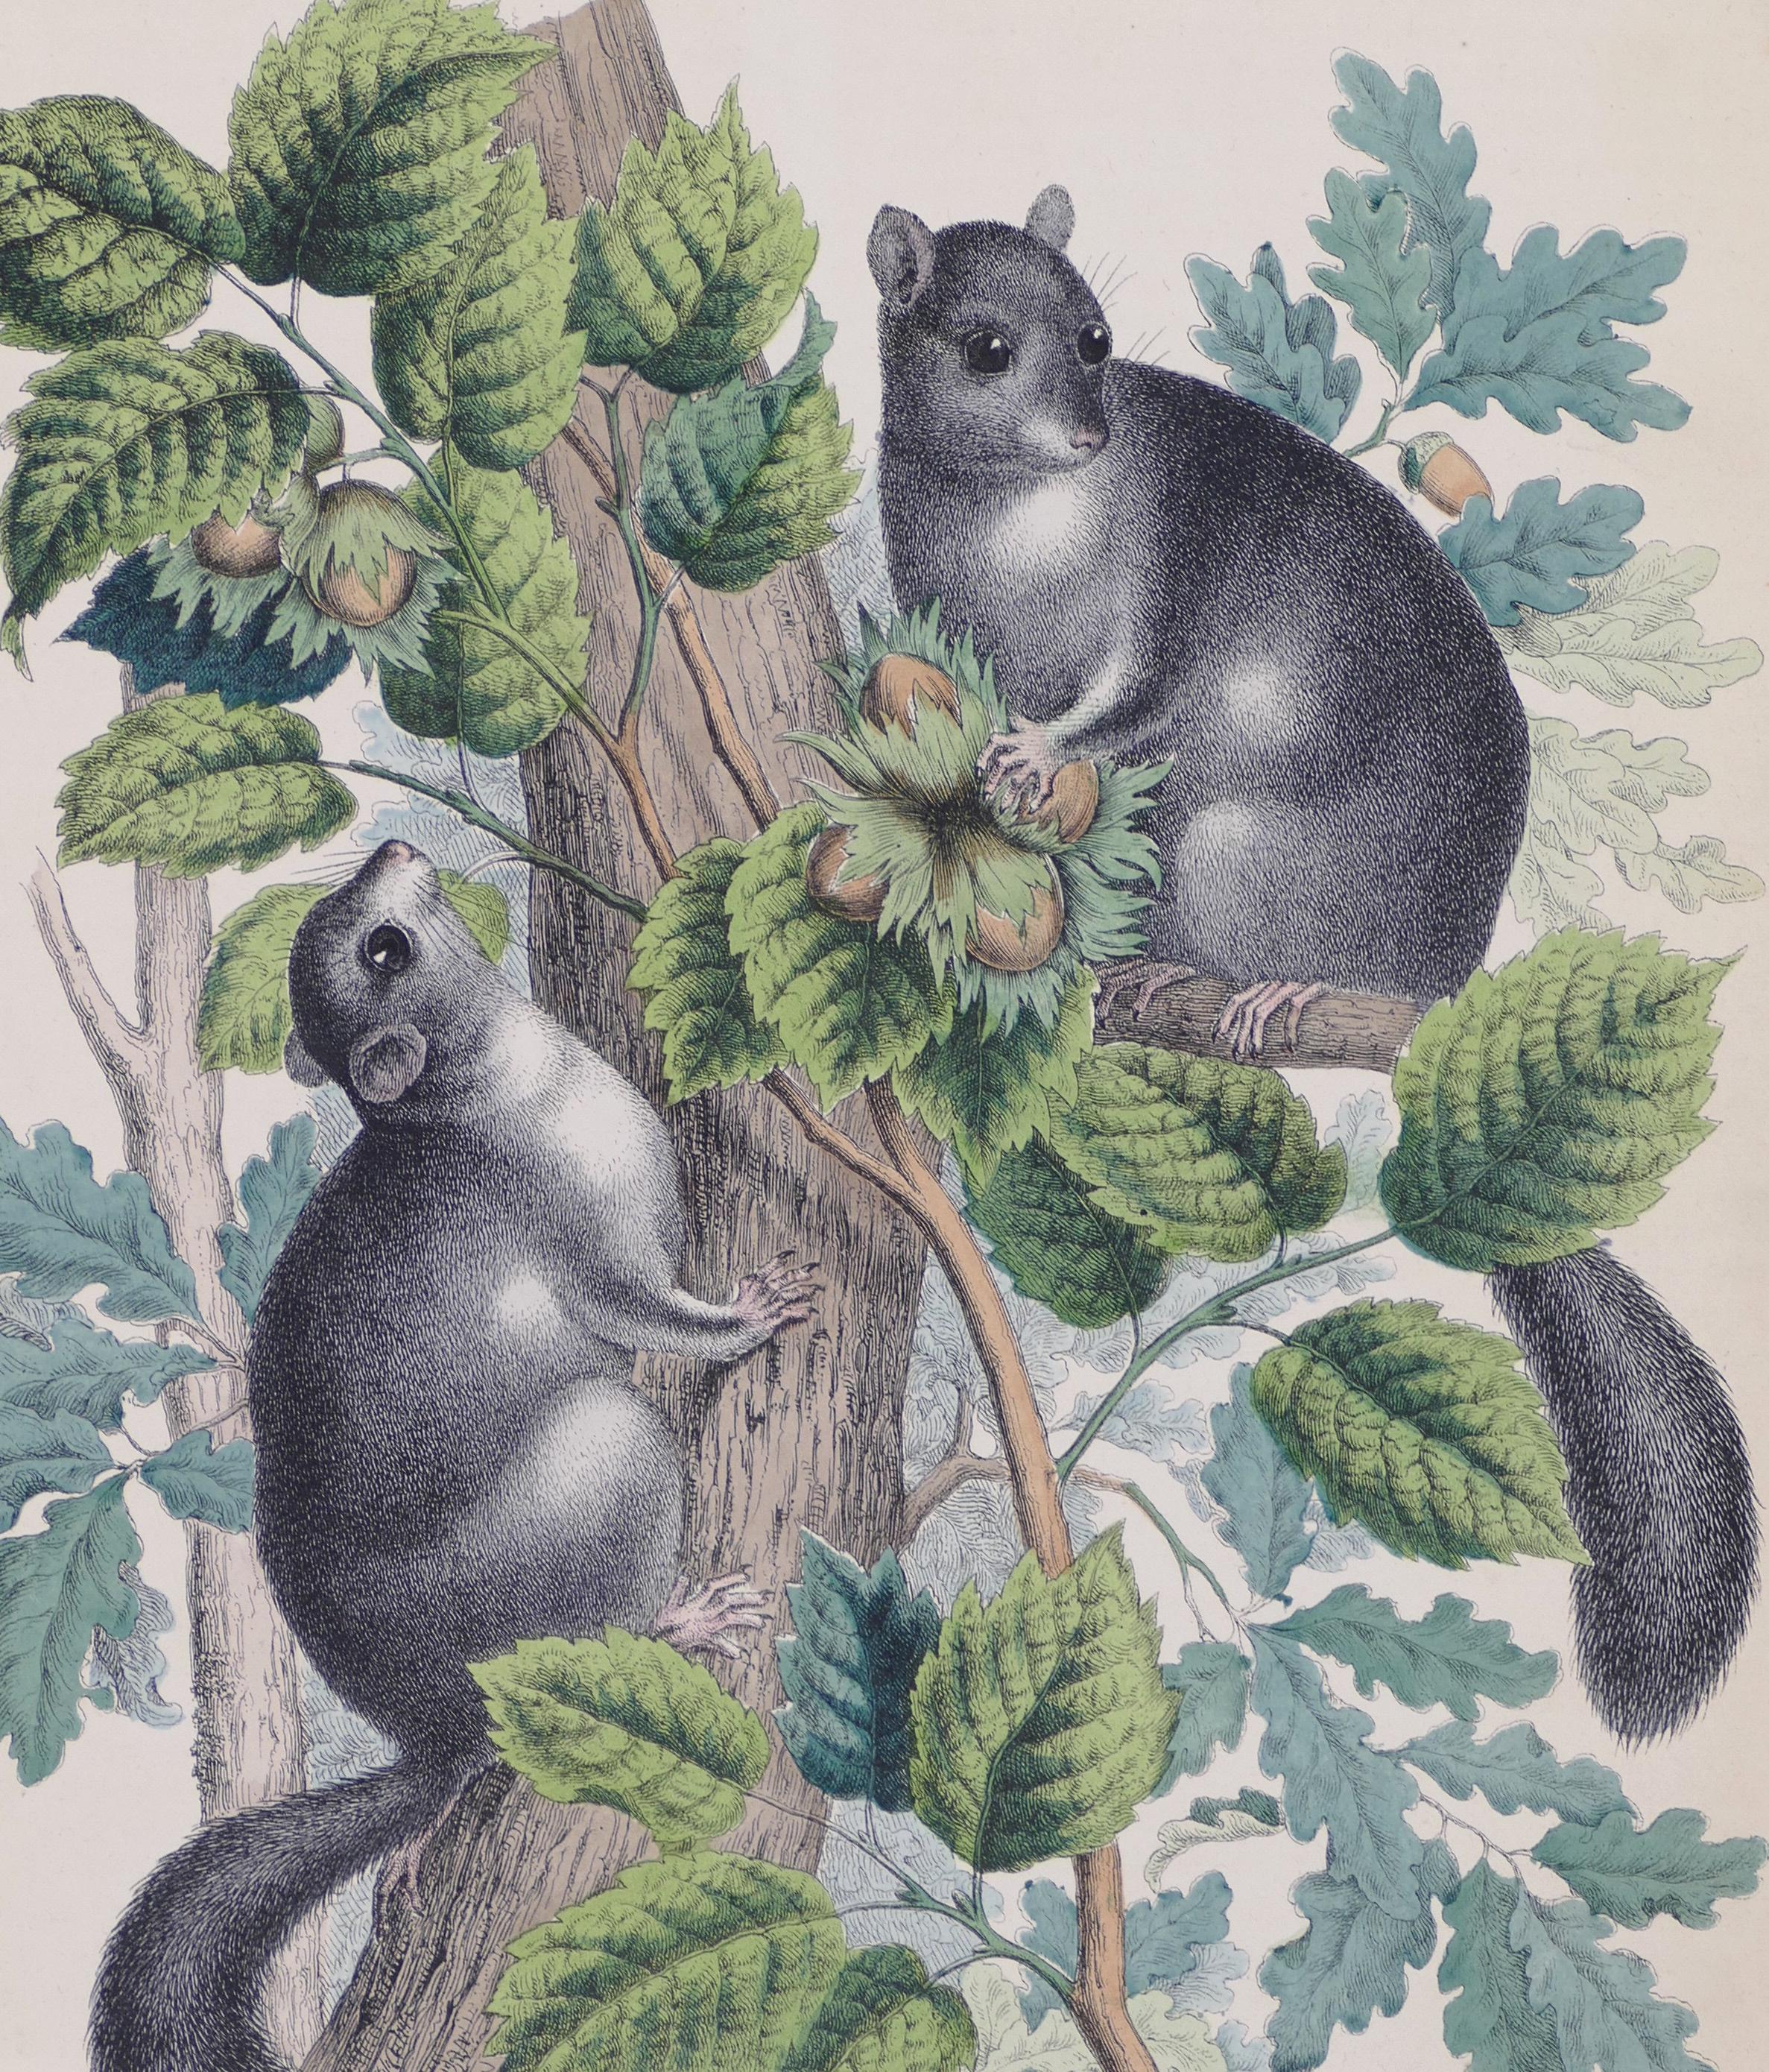 Squirrels with Hazelnuts  - Original Lithograph - 1860 - Print by Unknown